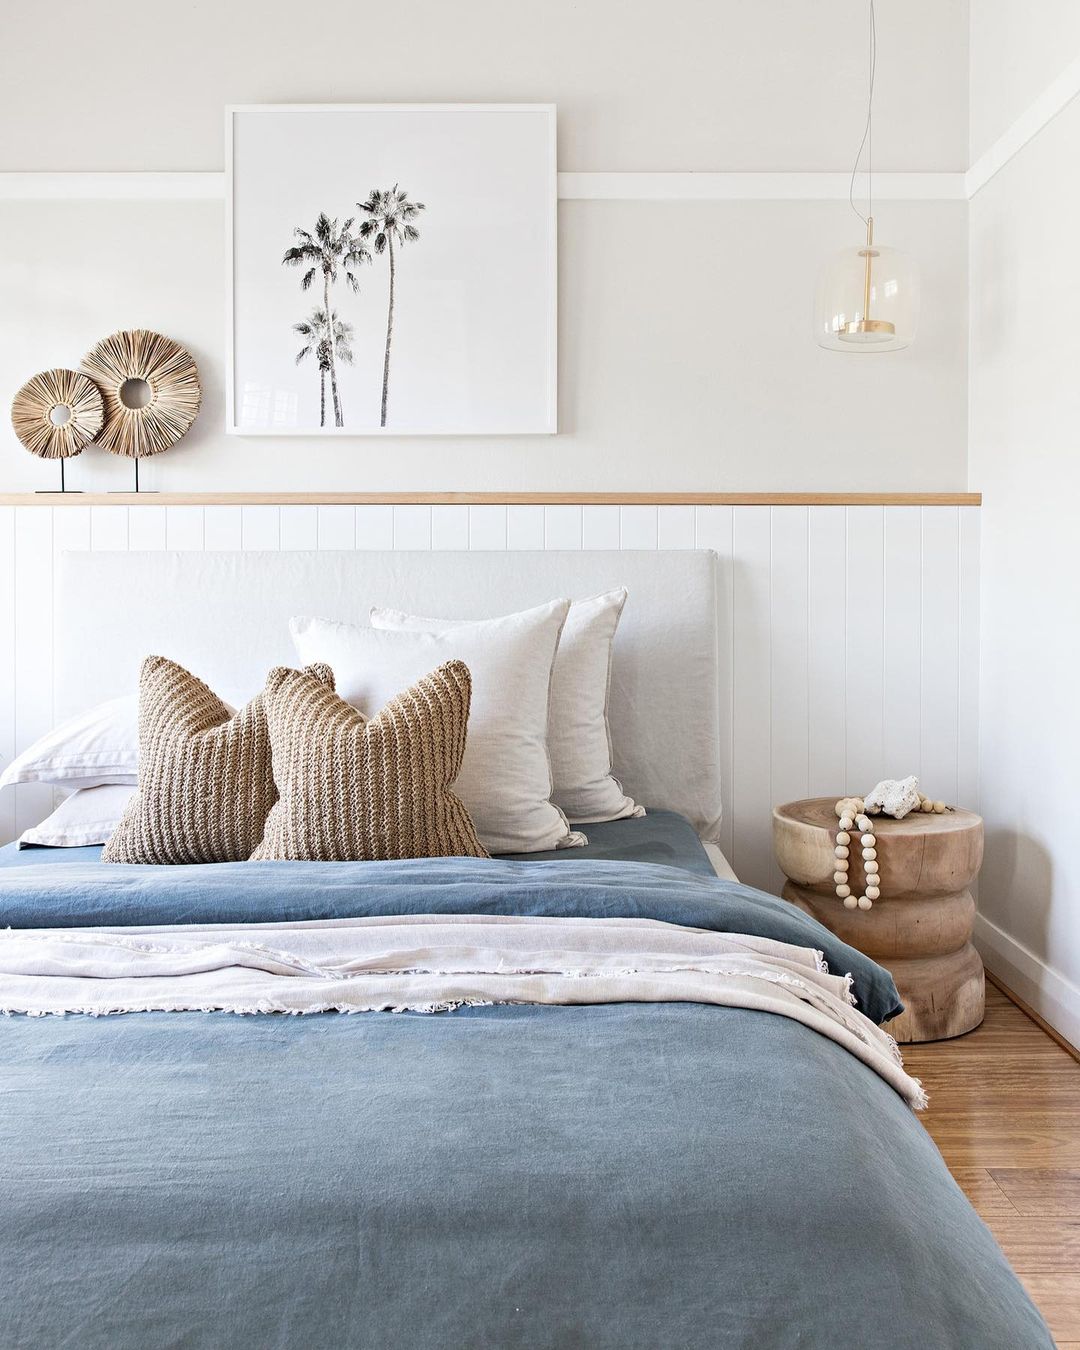 Add Coastal Art and Blue Accents for a Beachy Vibe